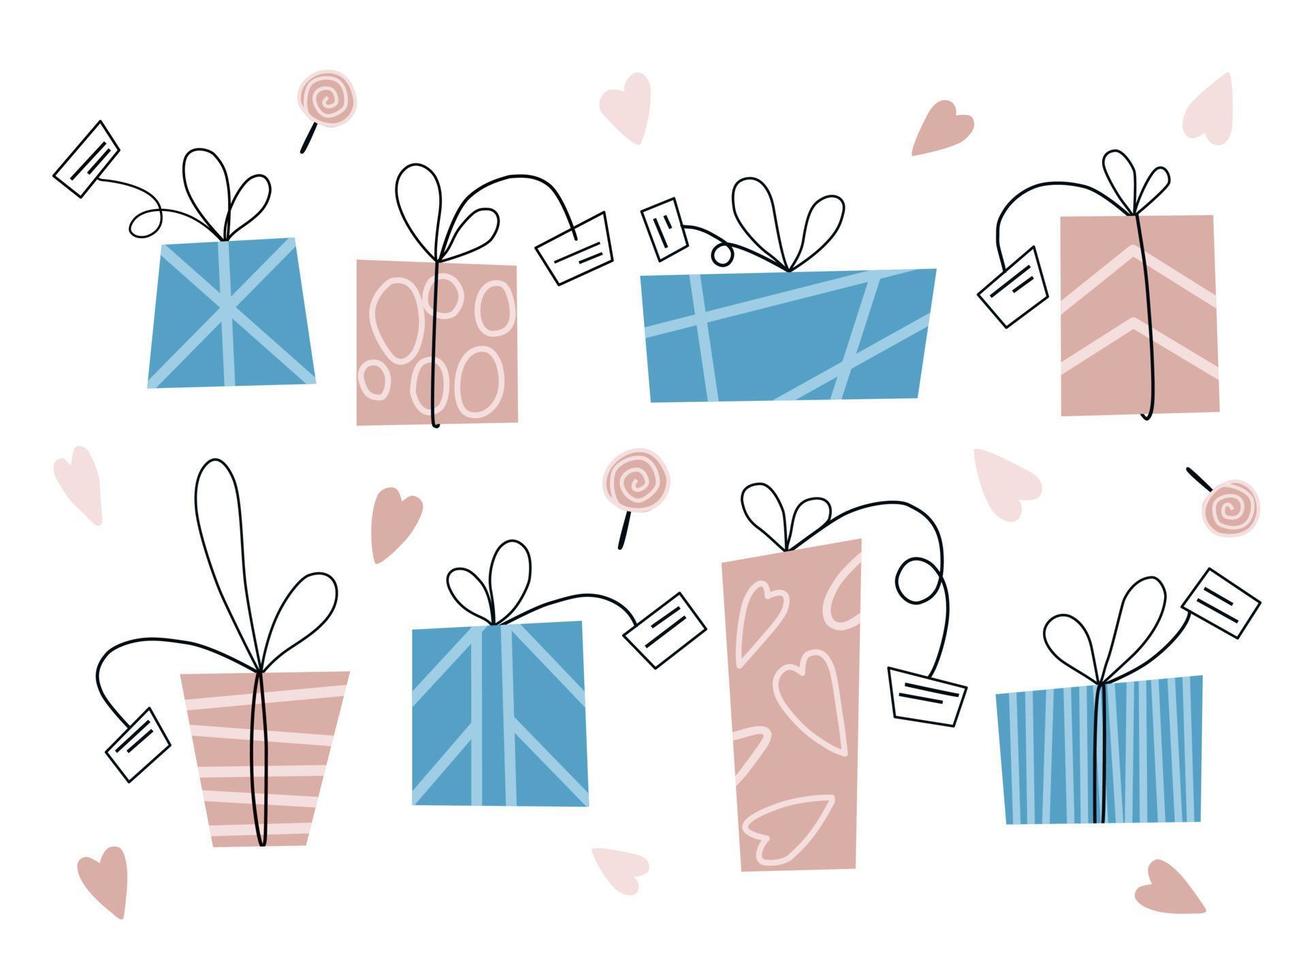 Valintine's day gift boxes with hearts and lollipops.  Flat vector illustration. Simple set of pink and blue elements for Febrary 14 card design.